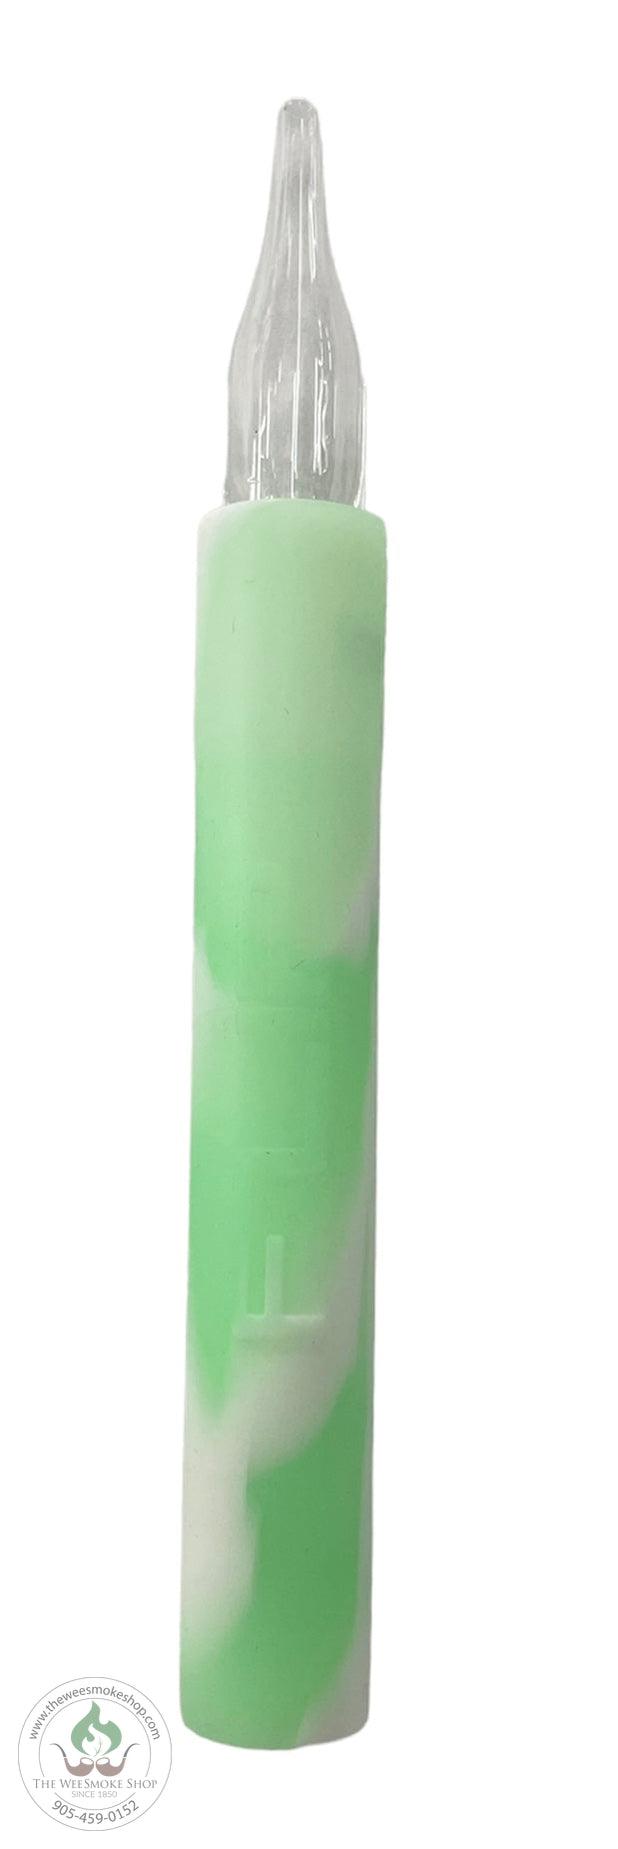 Flip Chillum/Dab Straw-Pipes-Mint-The Wee Smoke Shop